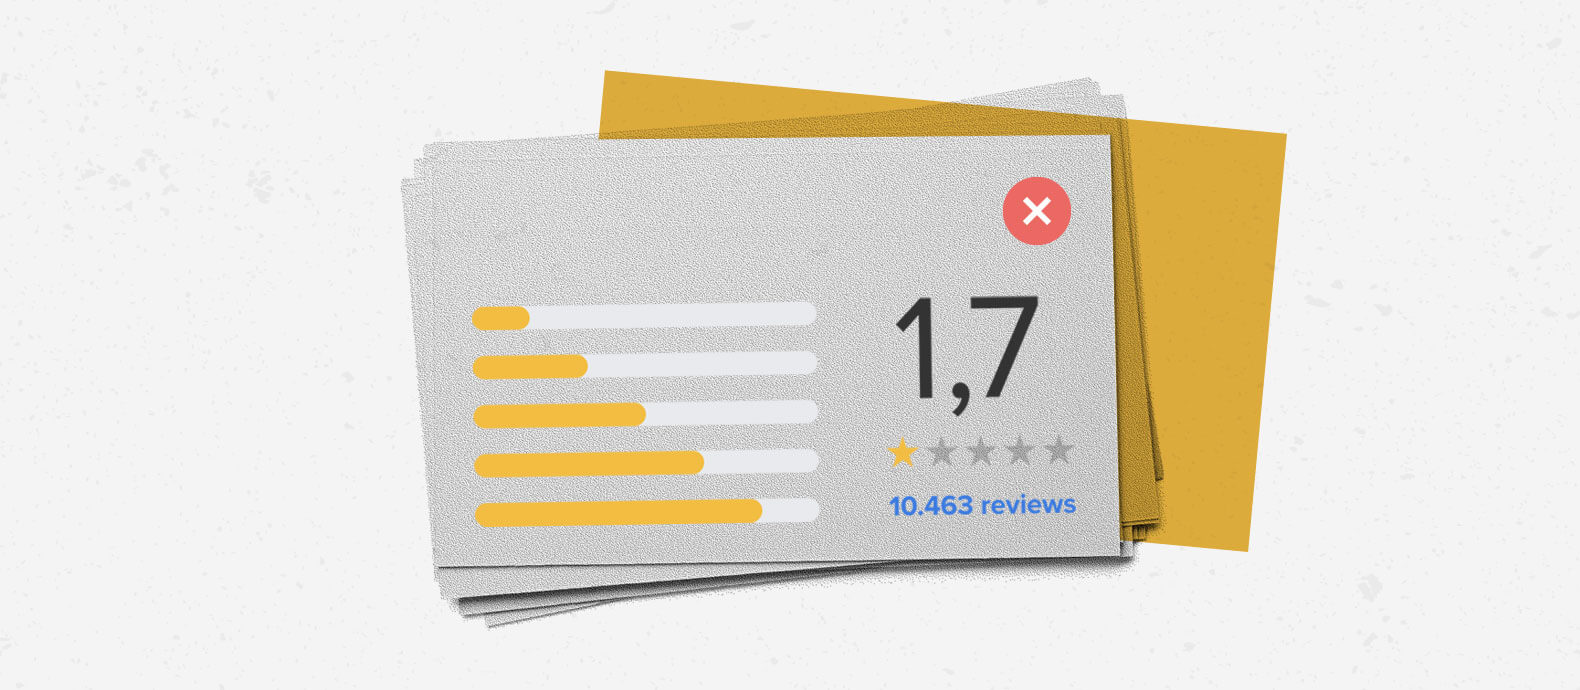 How to remove fake Google reviews and protect your brand reputation